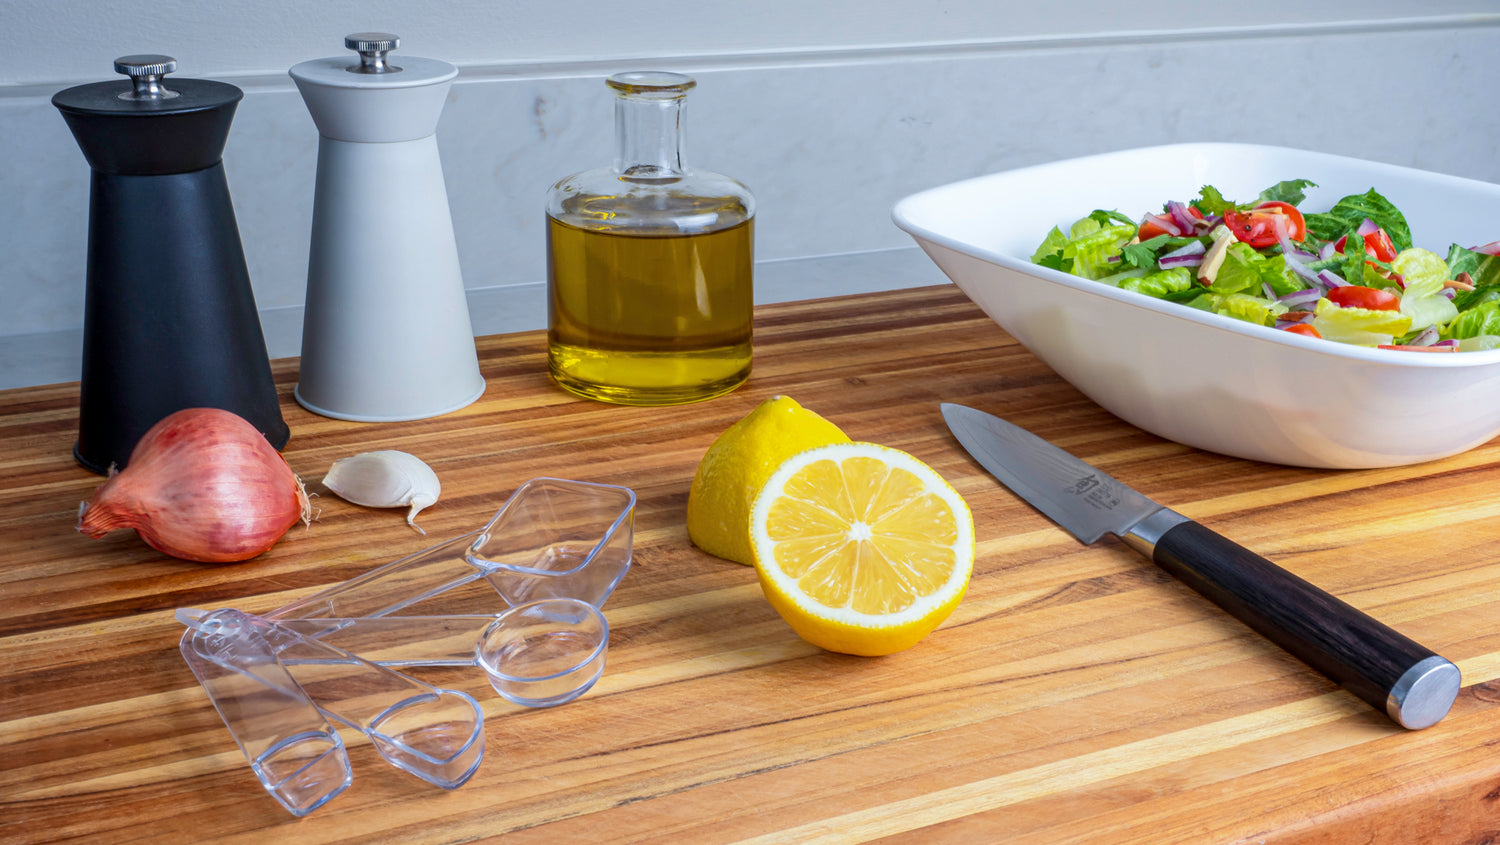 Photo of visual measuring spoons on a wooden cutting board with a lemon, knife, salad, seasonings and olive oil.